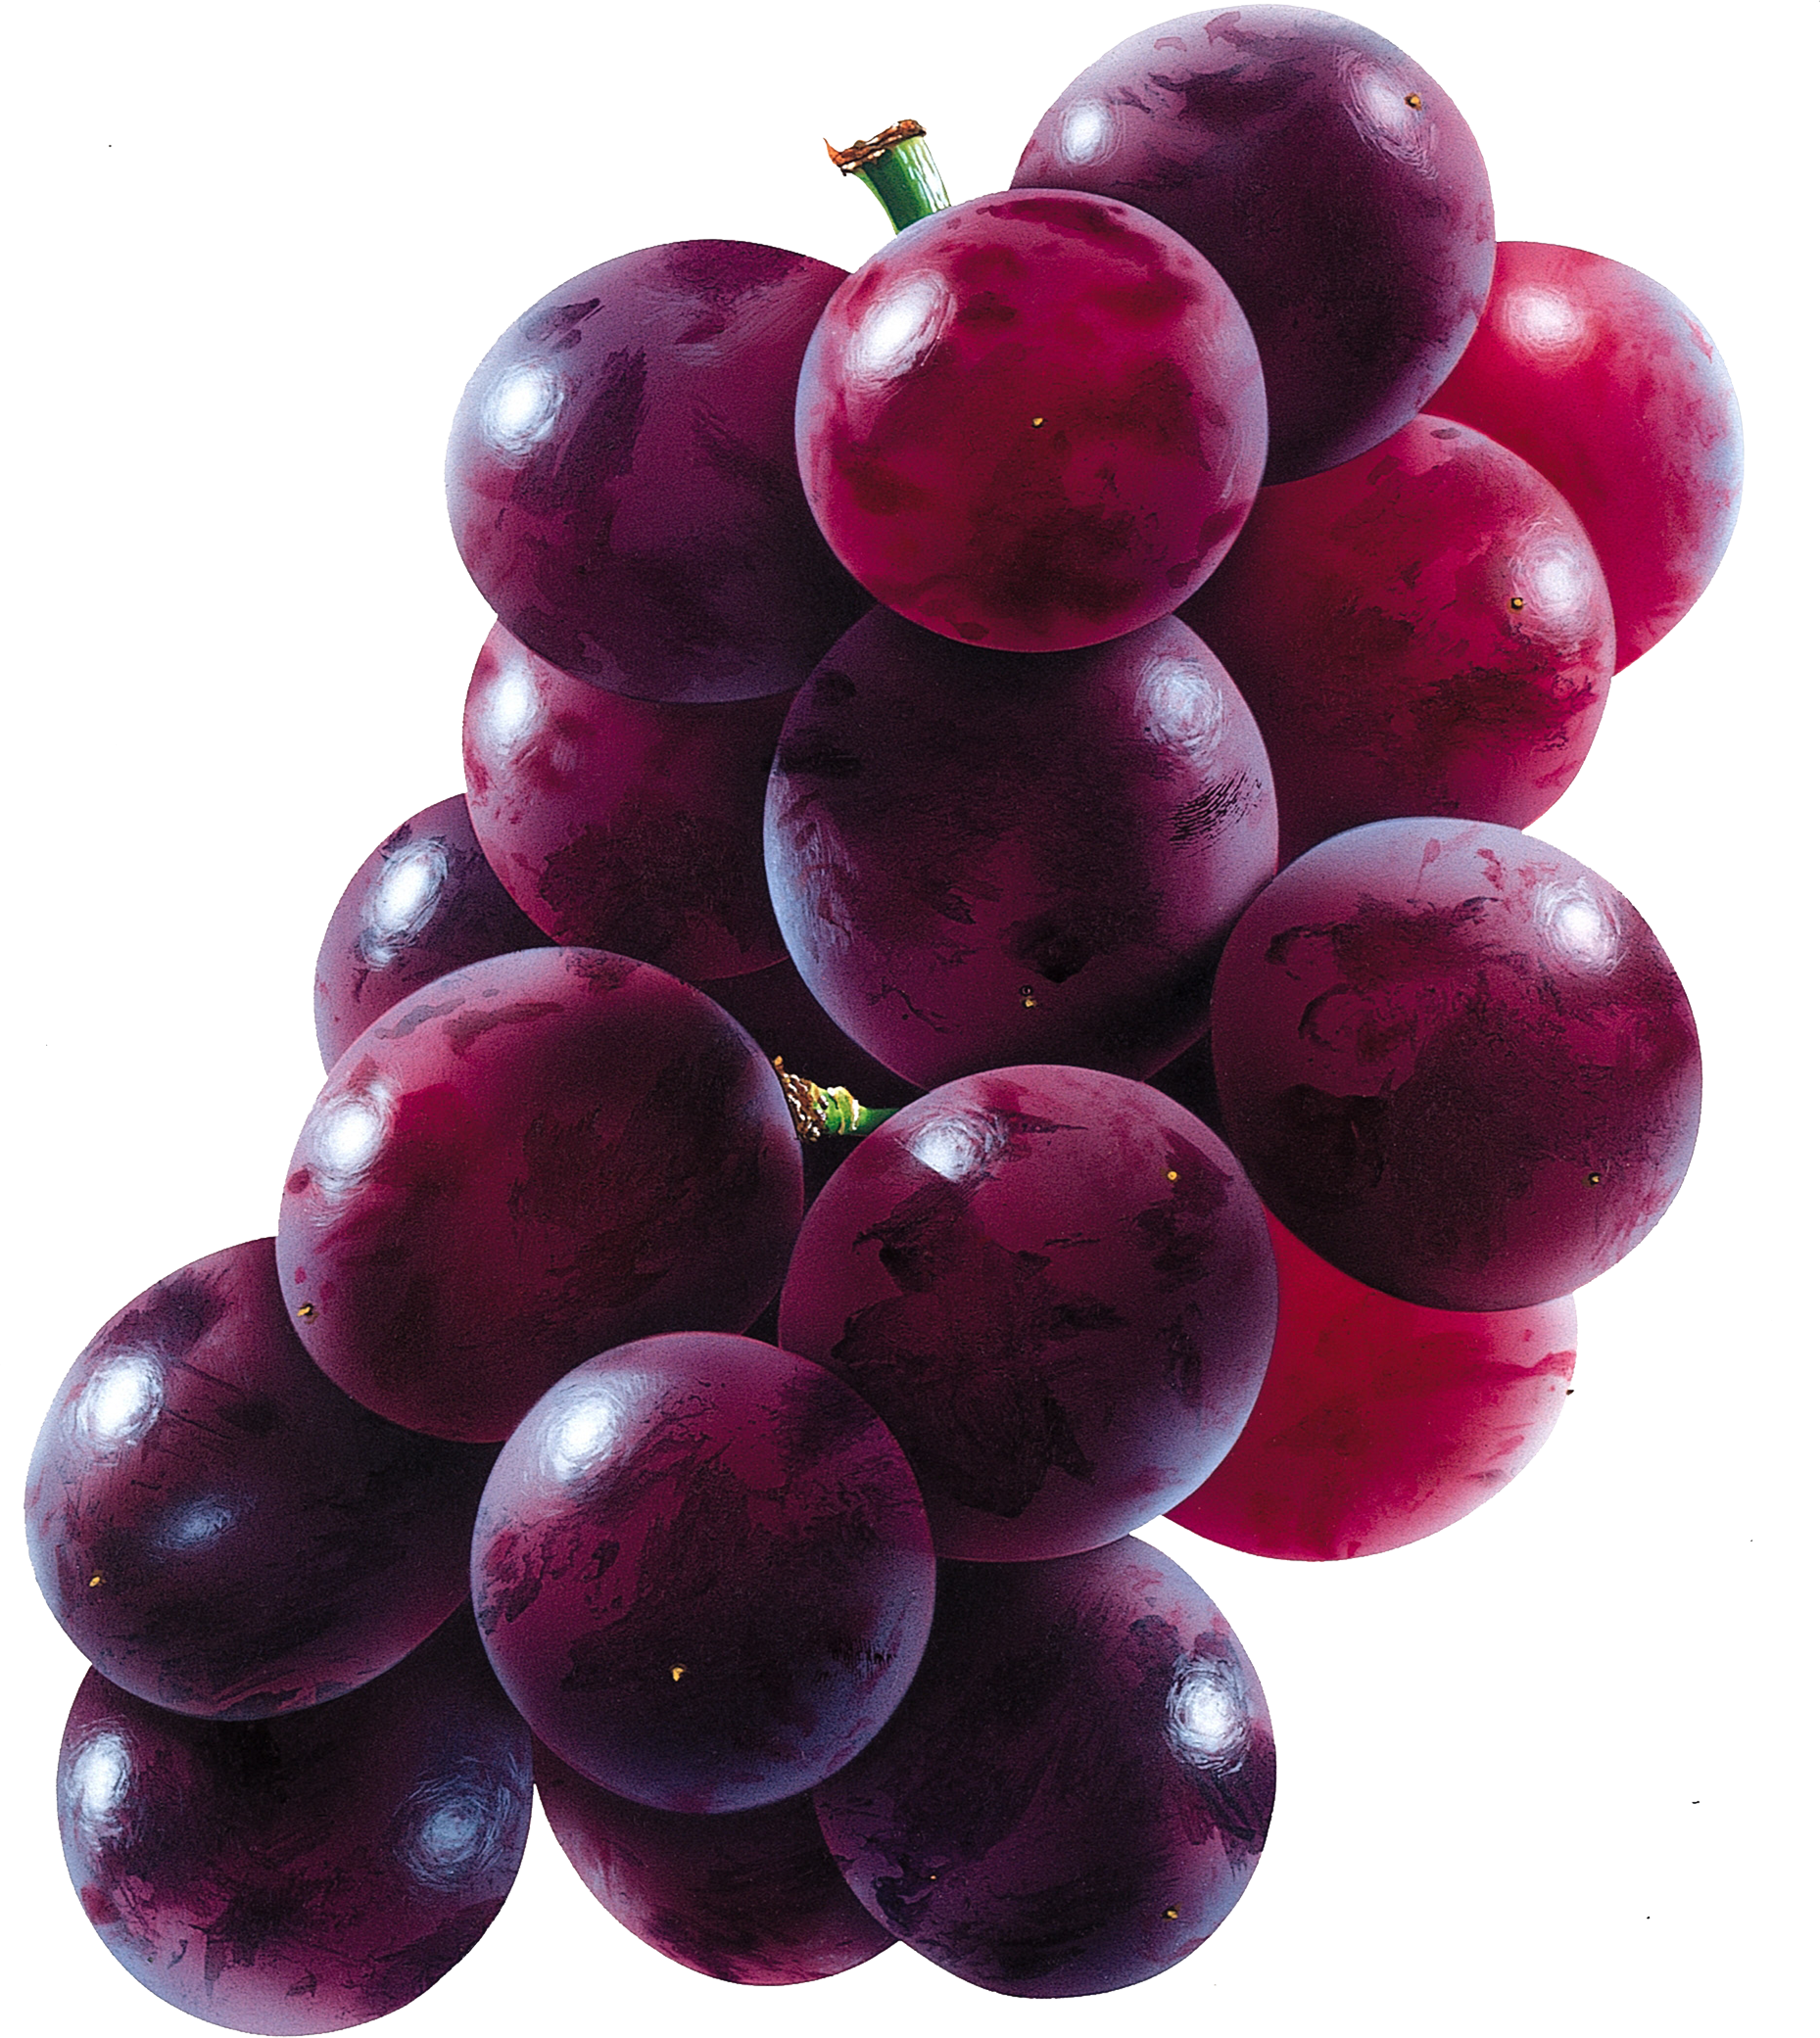 HD green grapes png picture m